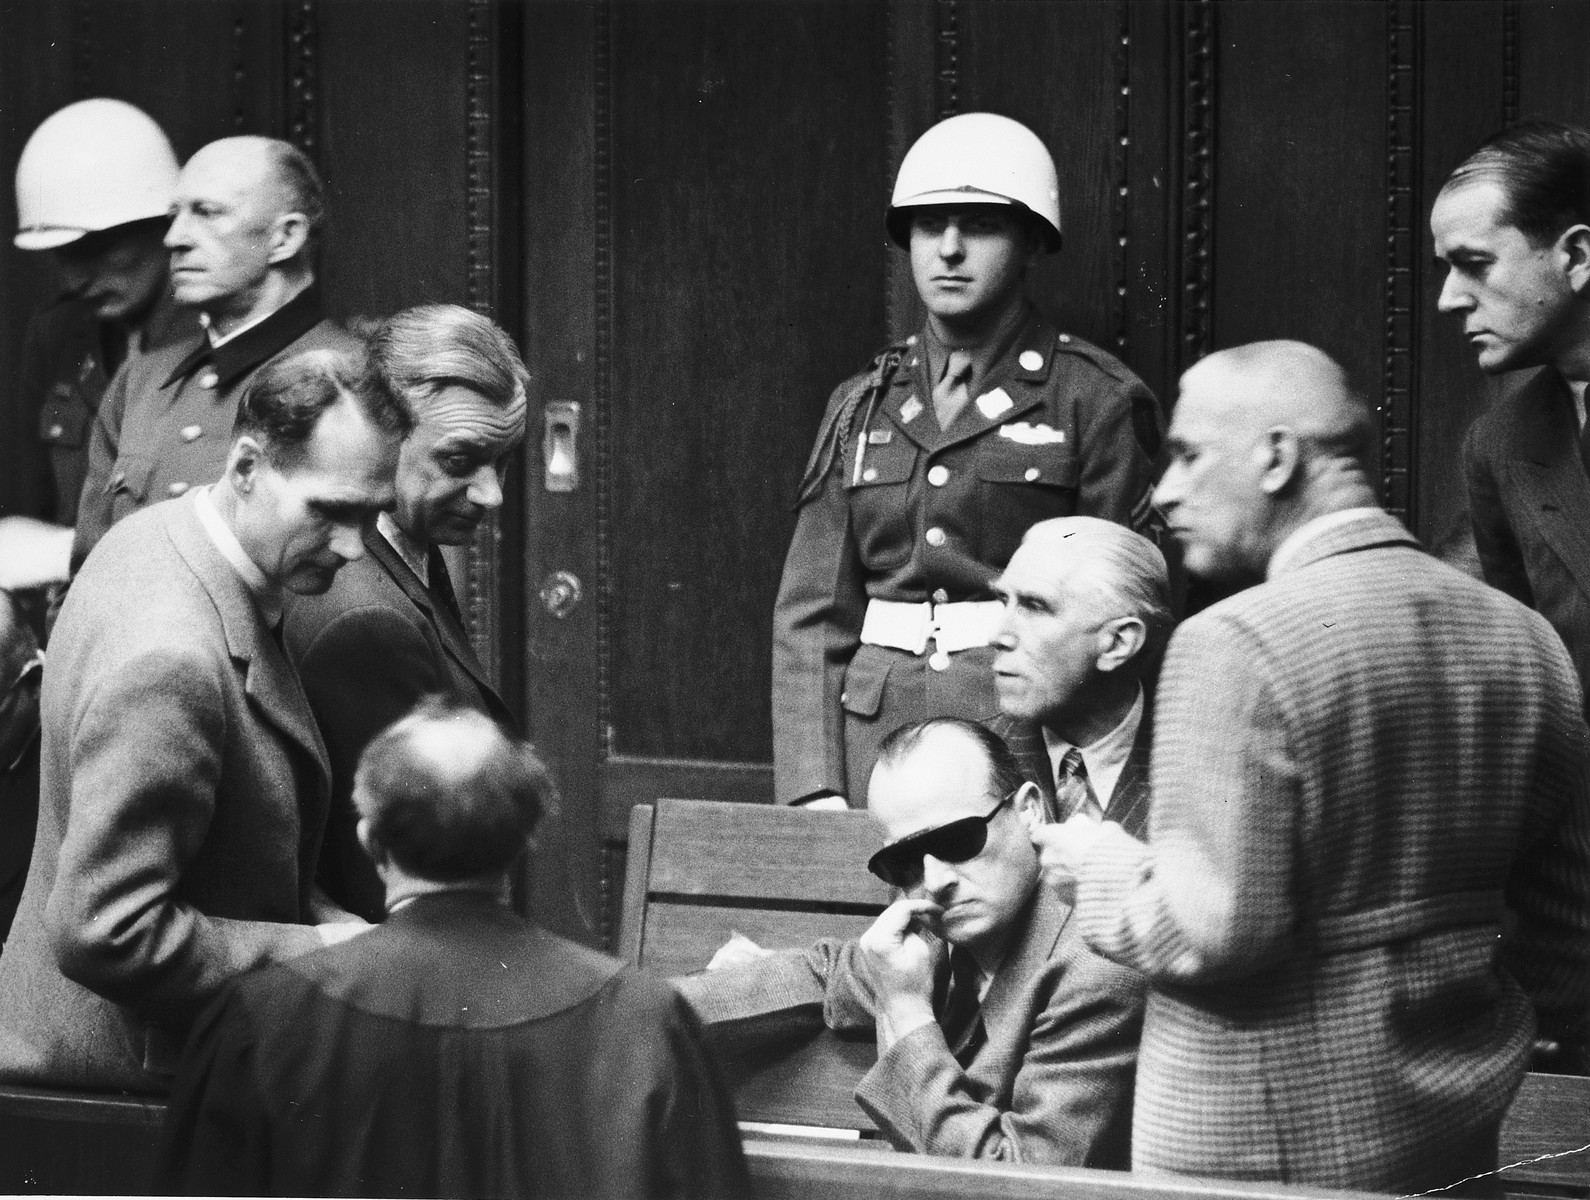 Defendants talk to each other and to their lawyer during a break at the International Military Tribunal in Nuremberg. 

Among those pictured from left to right are Rudolf Hess, Arthur Seyss-Inquart, Hans Frank, Franz von Pappen, Wilhelm Frick and Albert Speer.  General Alfred Jodl is standing in back on the far left. Also pictured standing in the back, center is the donor, the American military policeman, Albert Rose.